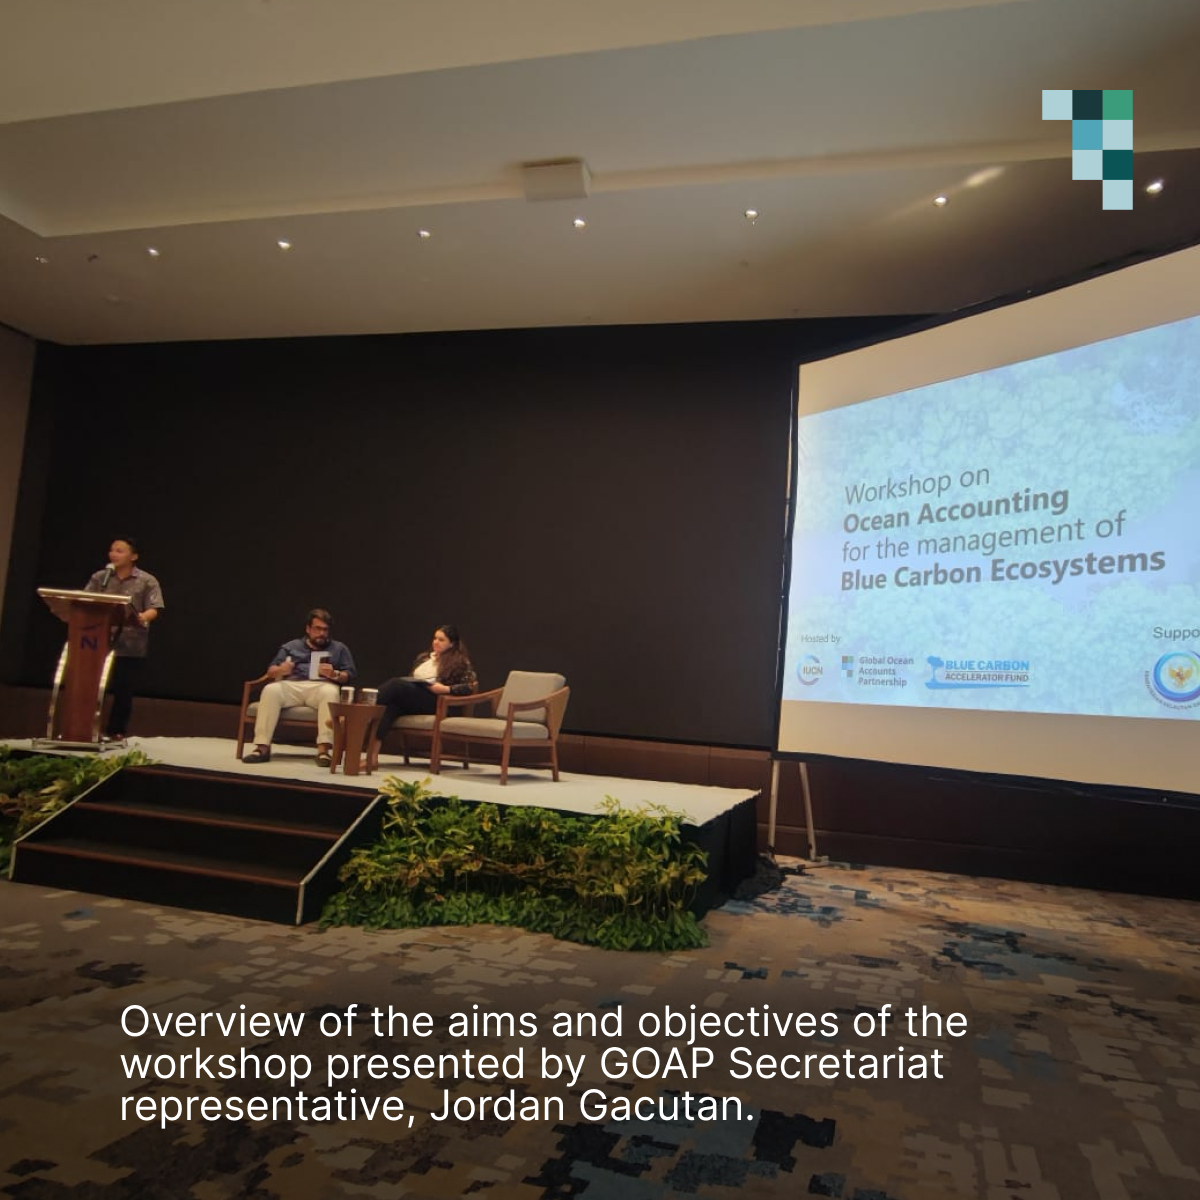 Workshop on Ocean Accounts and Governance of Blue Carbon Ecosystems